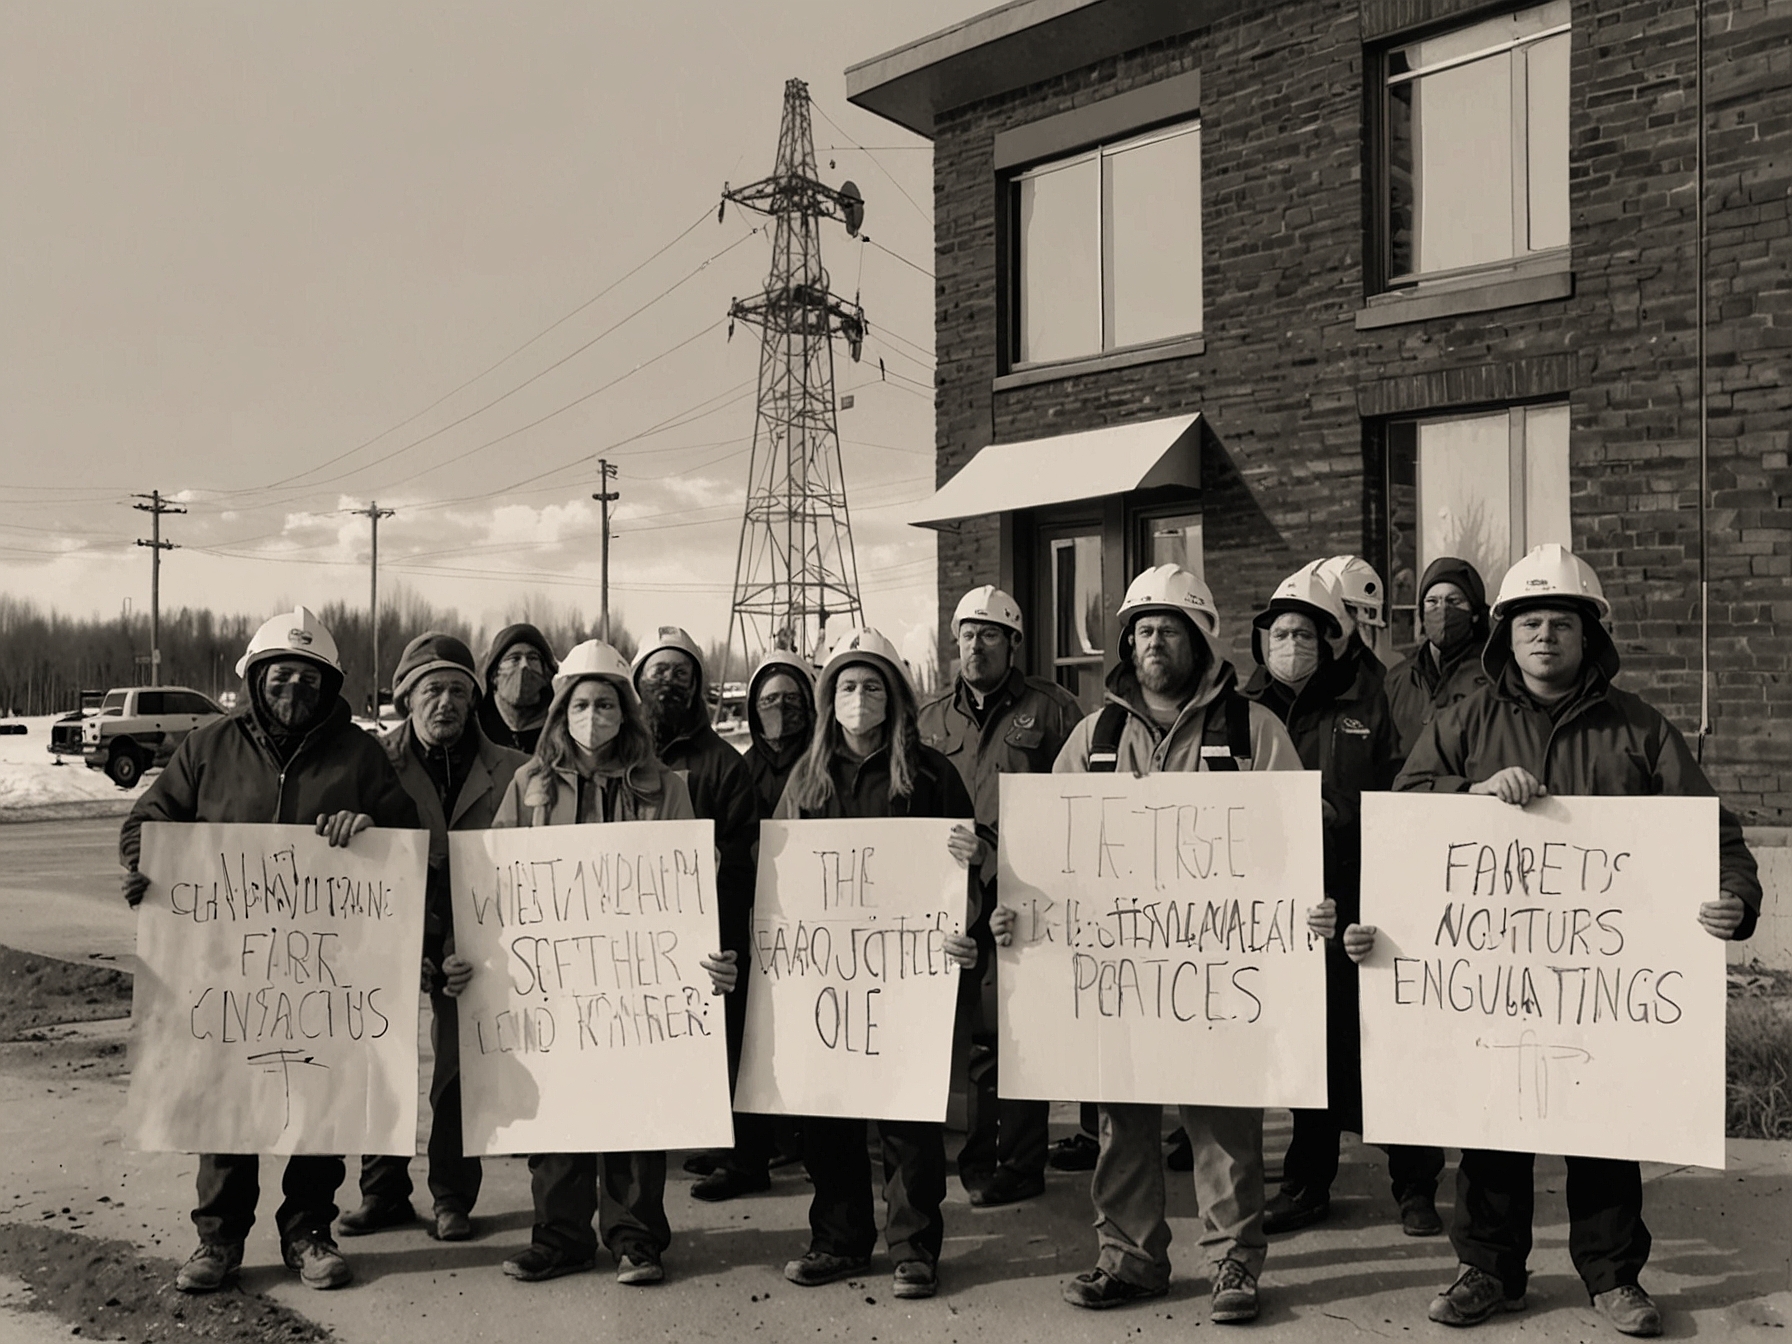 Environmental activists protest outside an oil and gas company’s office in Alberta, holding placards demanding stricter flaring regulations and better environmental practices.